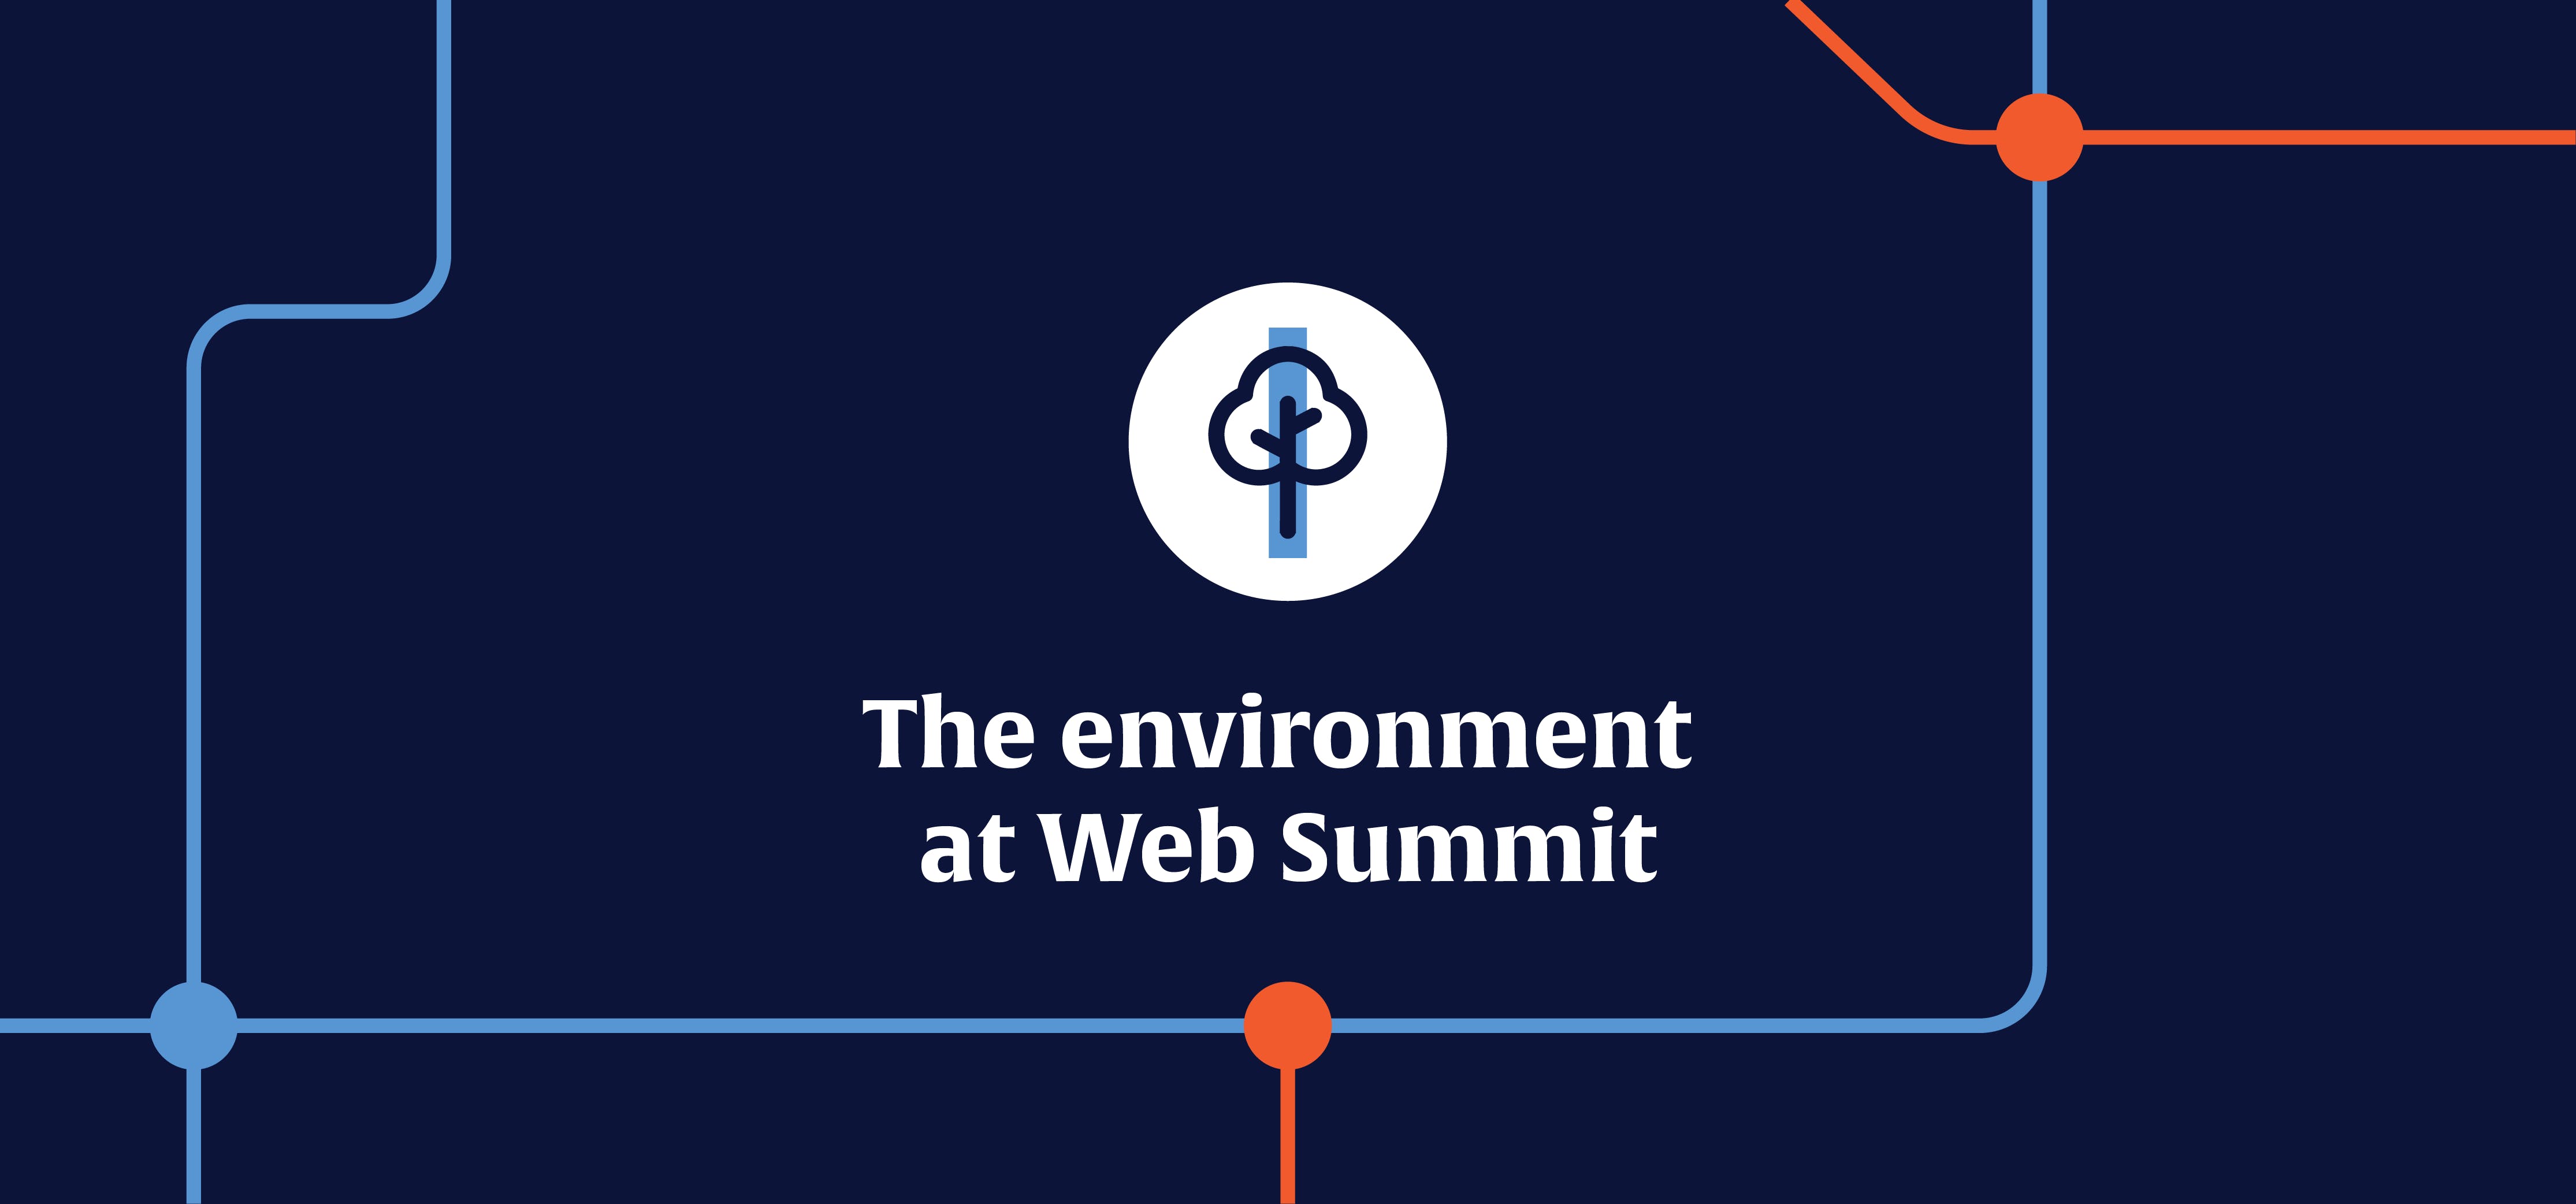 Text reading: 'The environment at Web Summit' and a logo-style image of a tree above it.